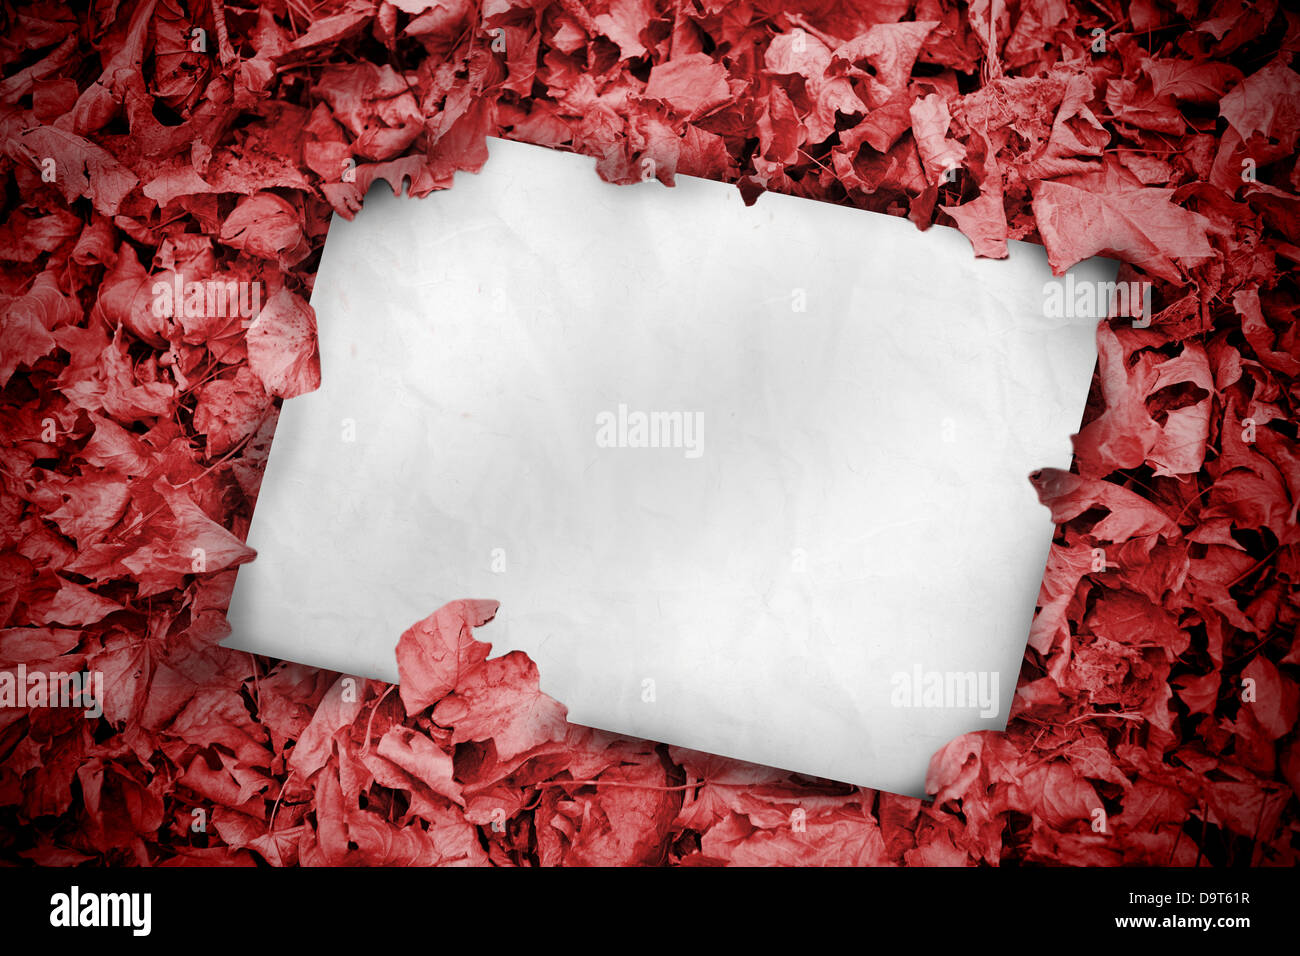 White poster buried into red leaves Stock Photo